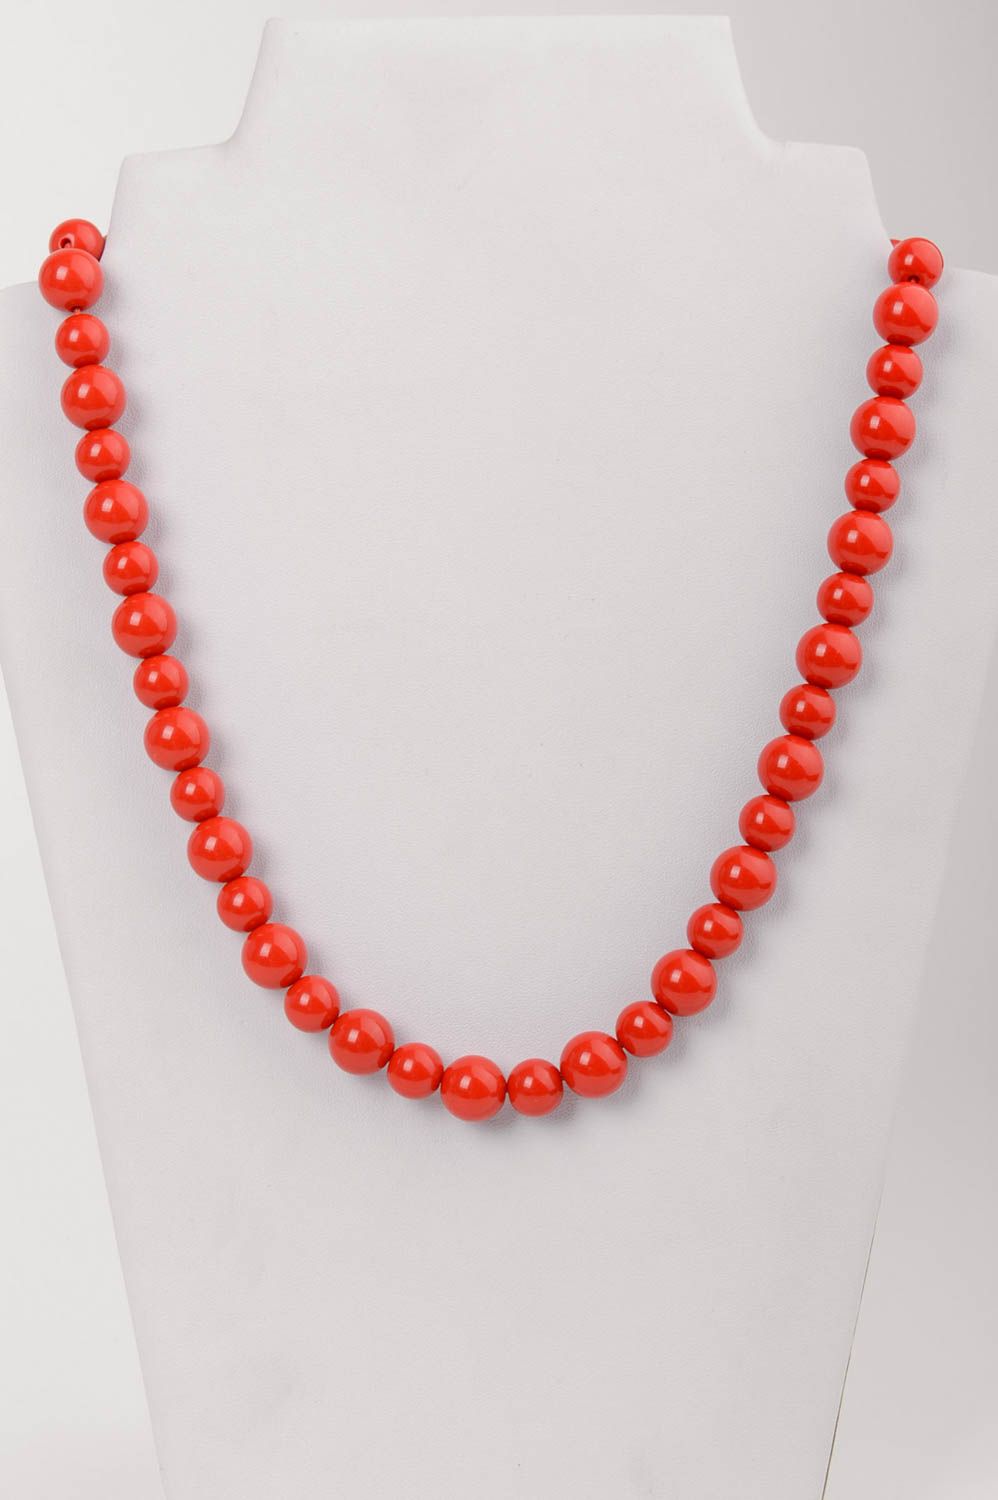 Handmade simple red necklace made of plastic beads with clasp photo 1